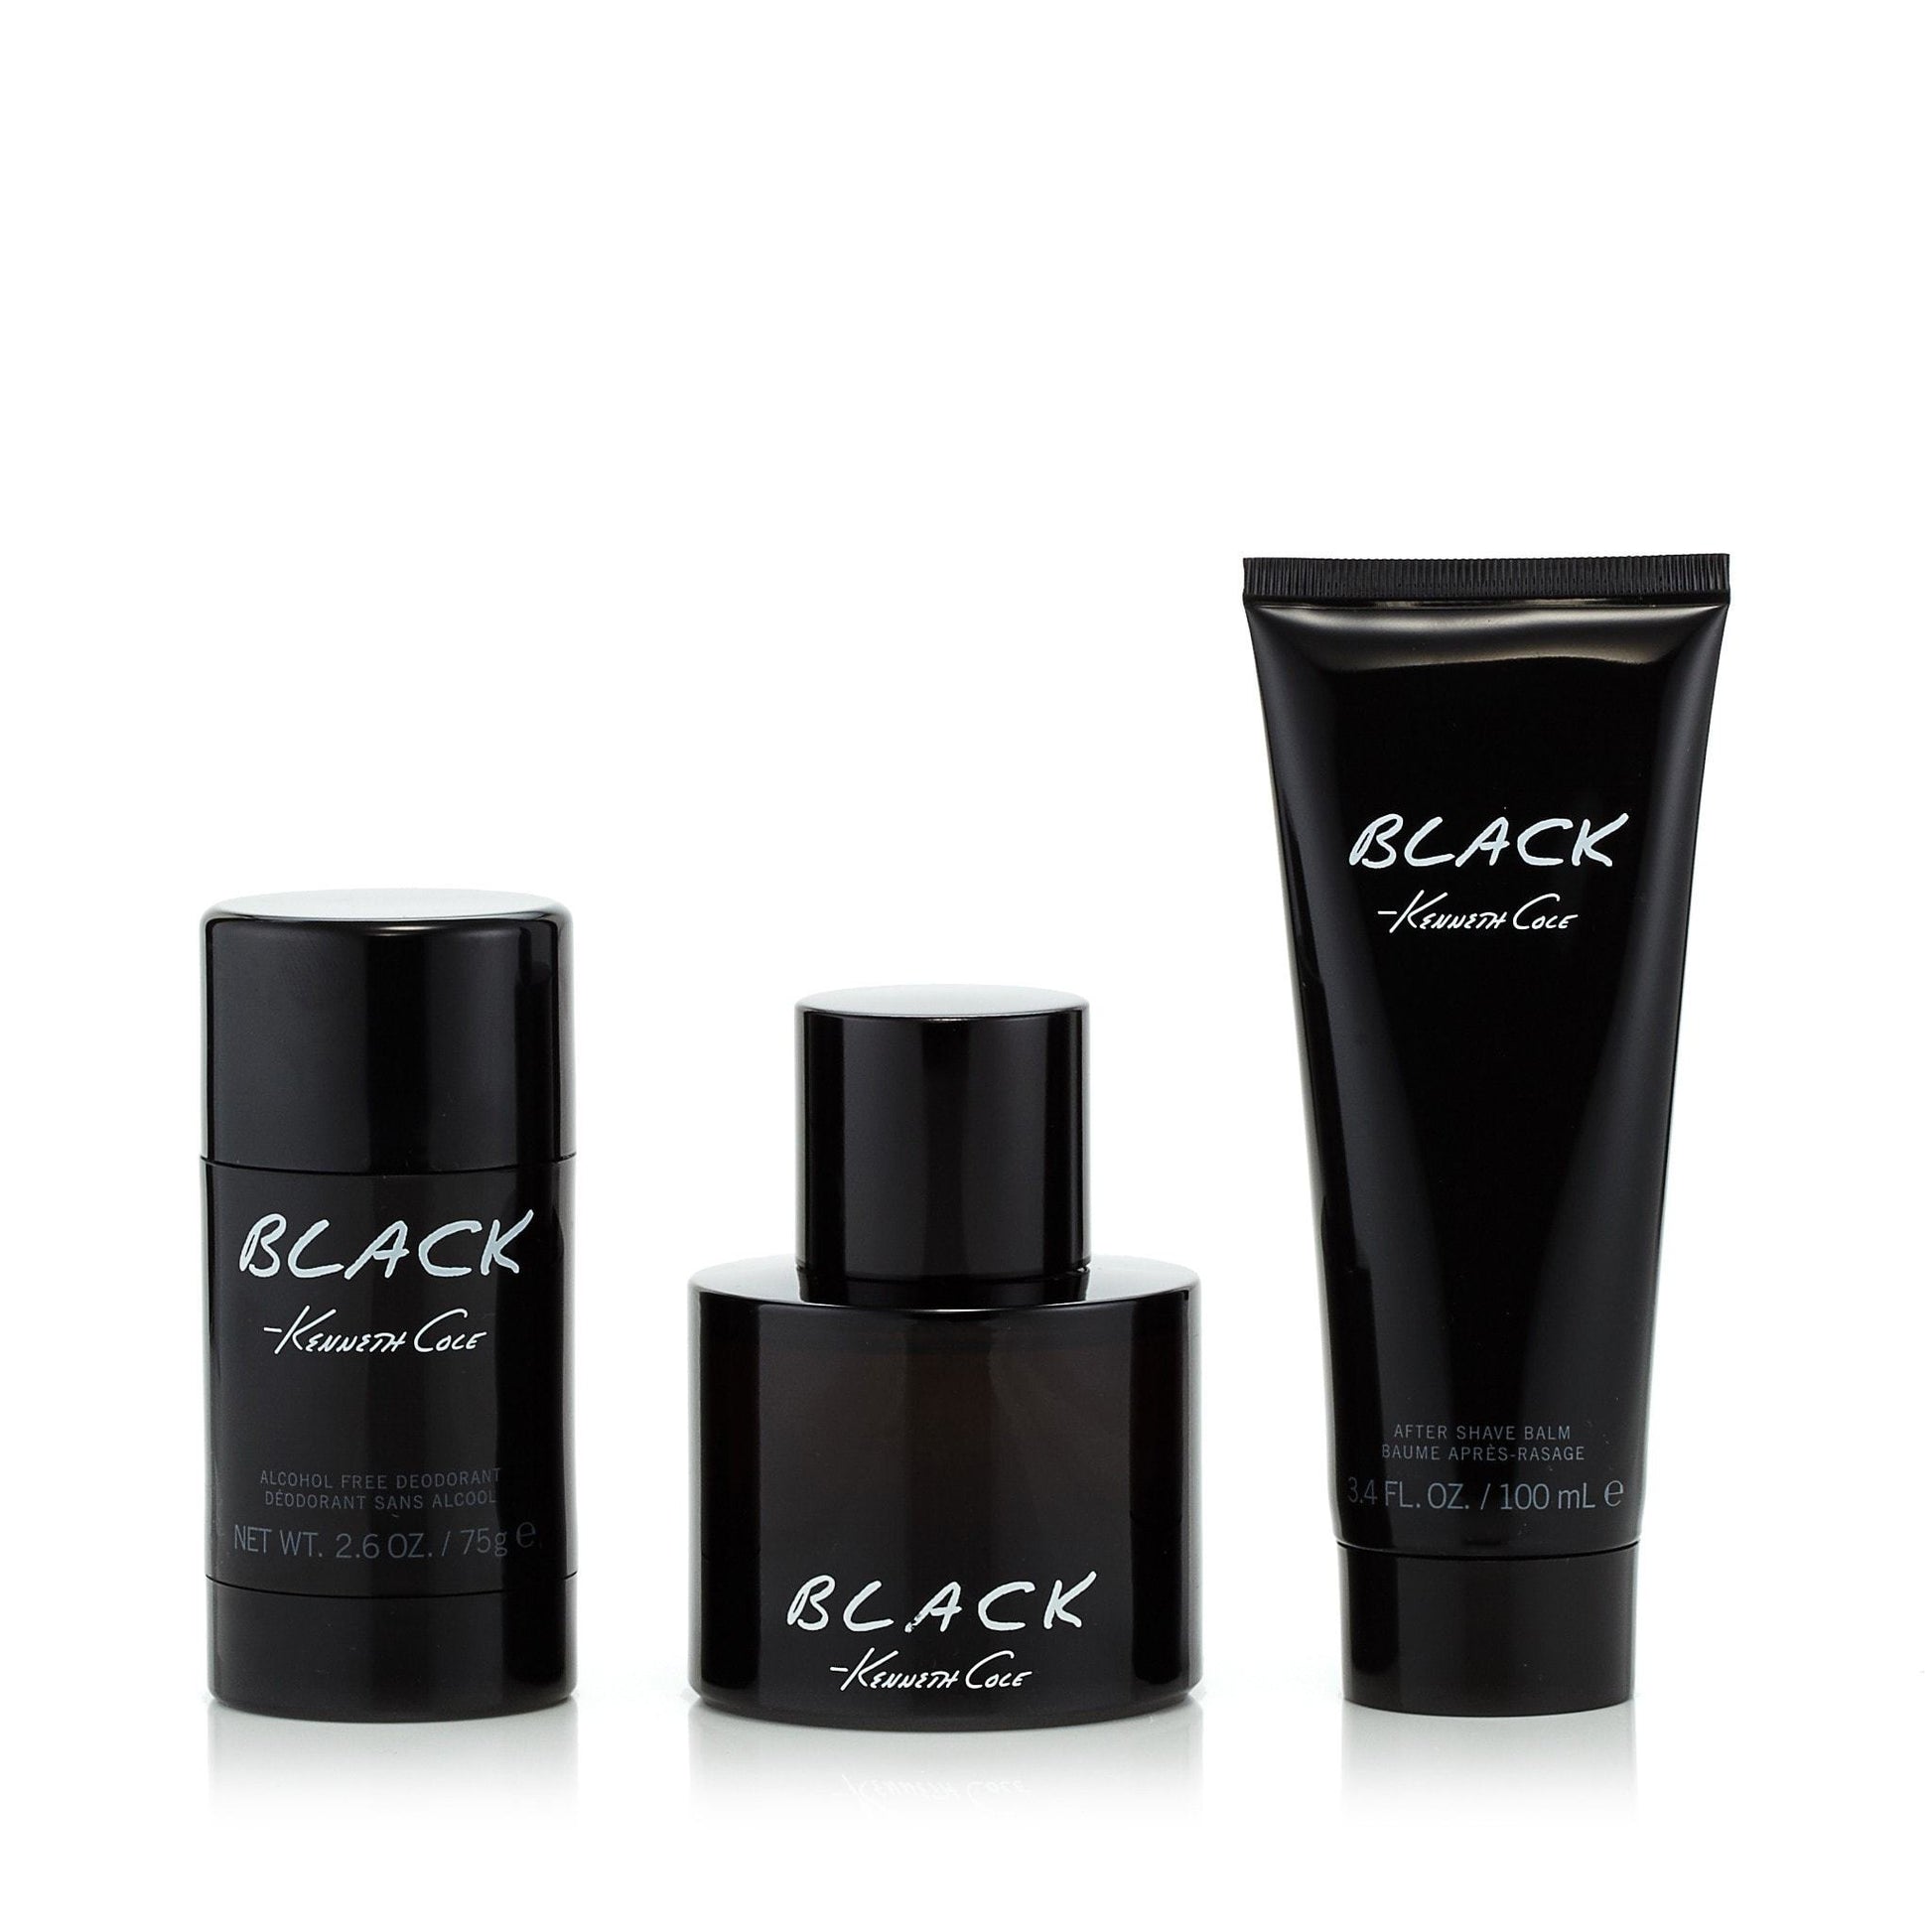 Kenneth Cole Black Gift Set for Men by Kenneth Cole, Product image 1